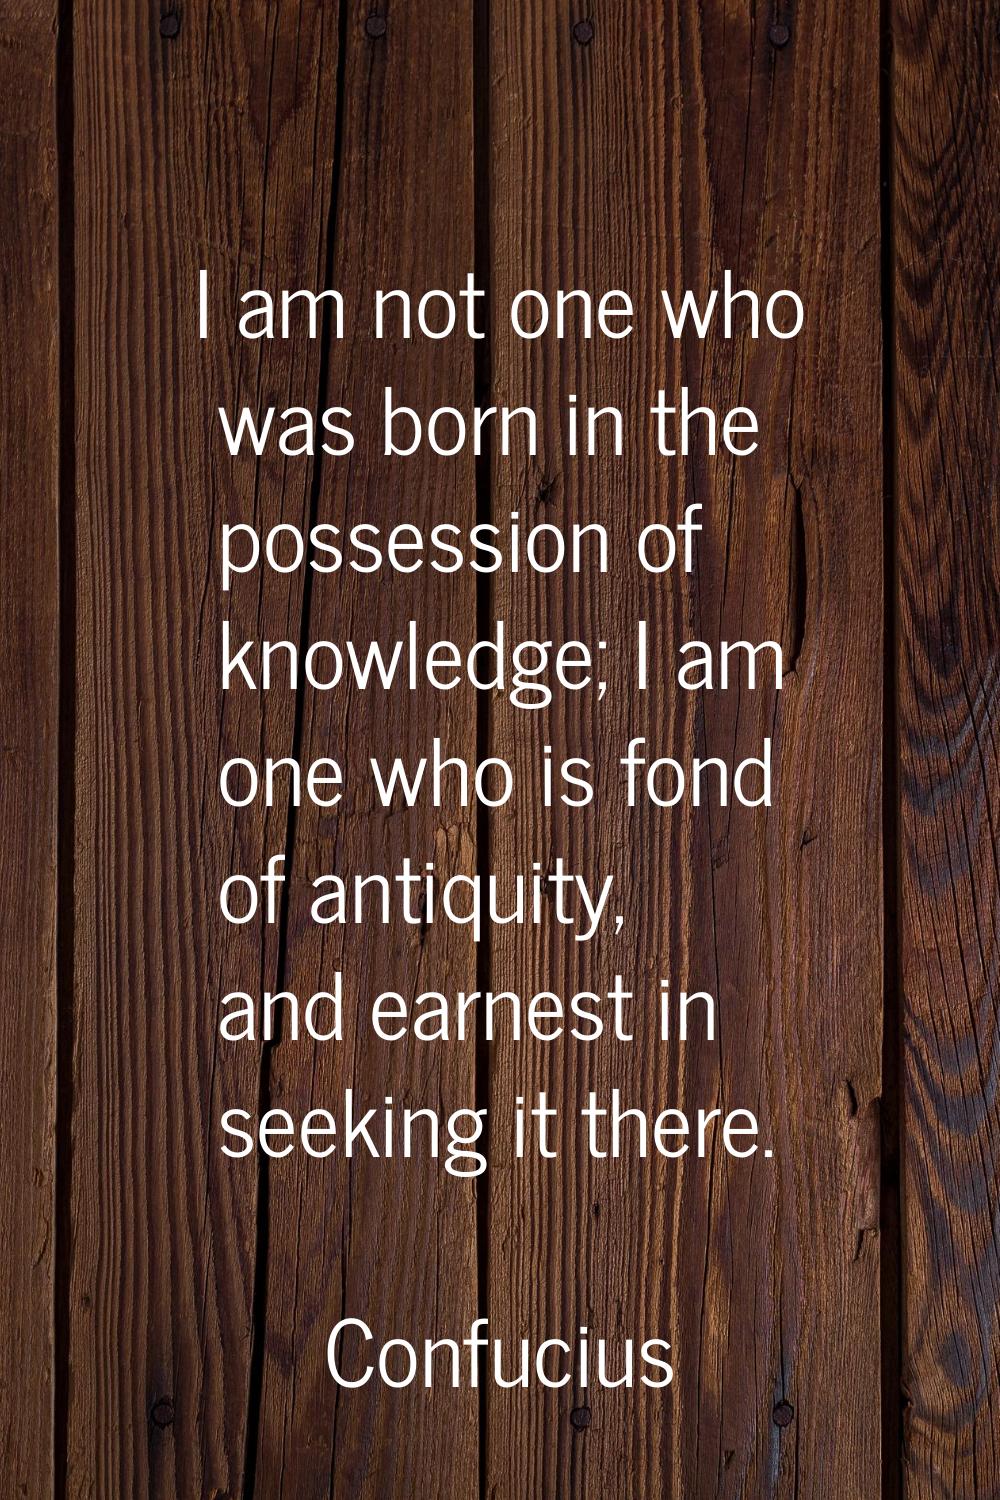 I am not one who was born in the possession of knowledge; I am one who is fond of antiquity, and ea